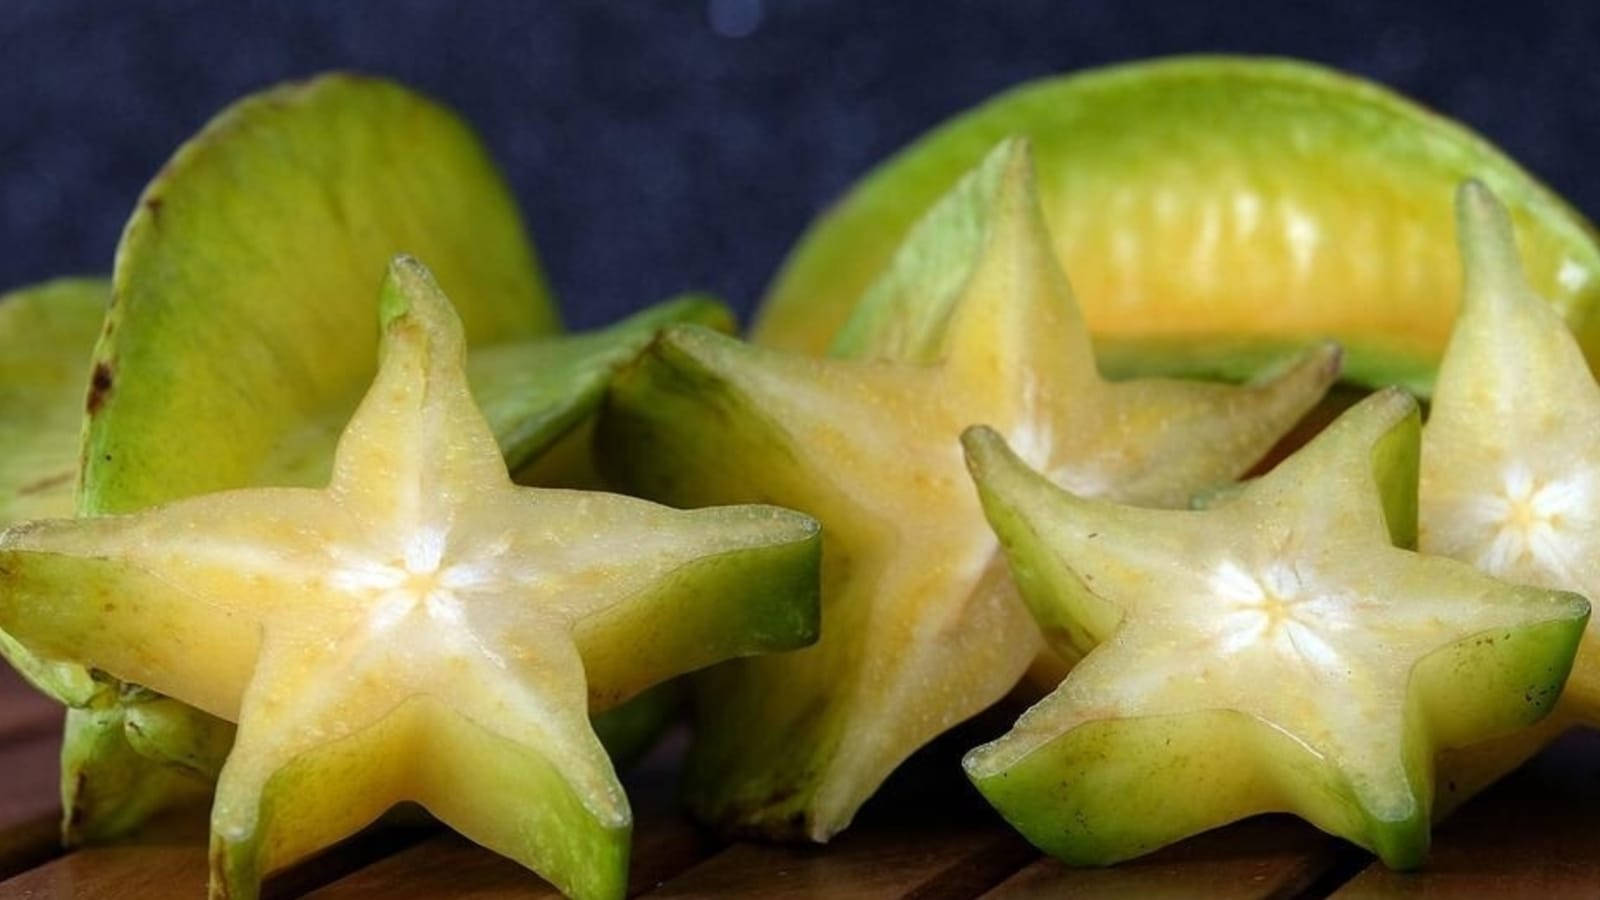 Star Fruits On The Wooden Table Wallpaper